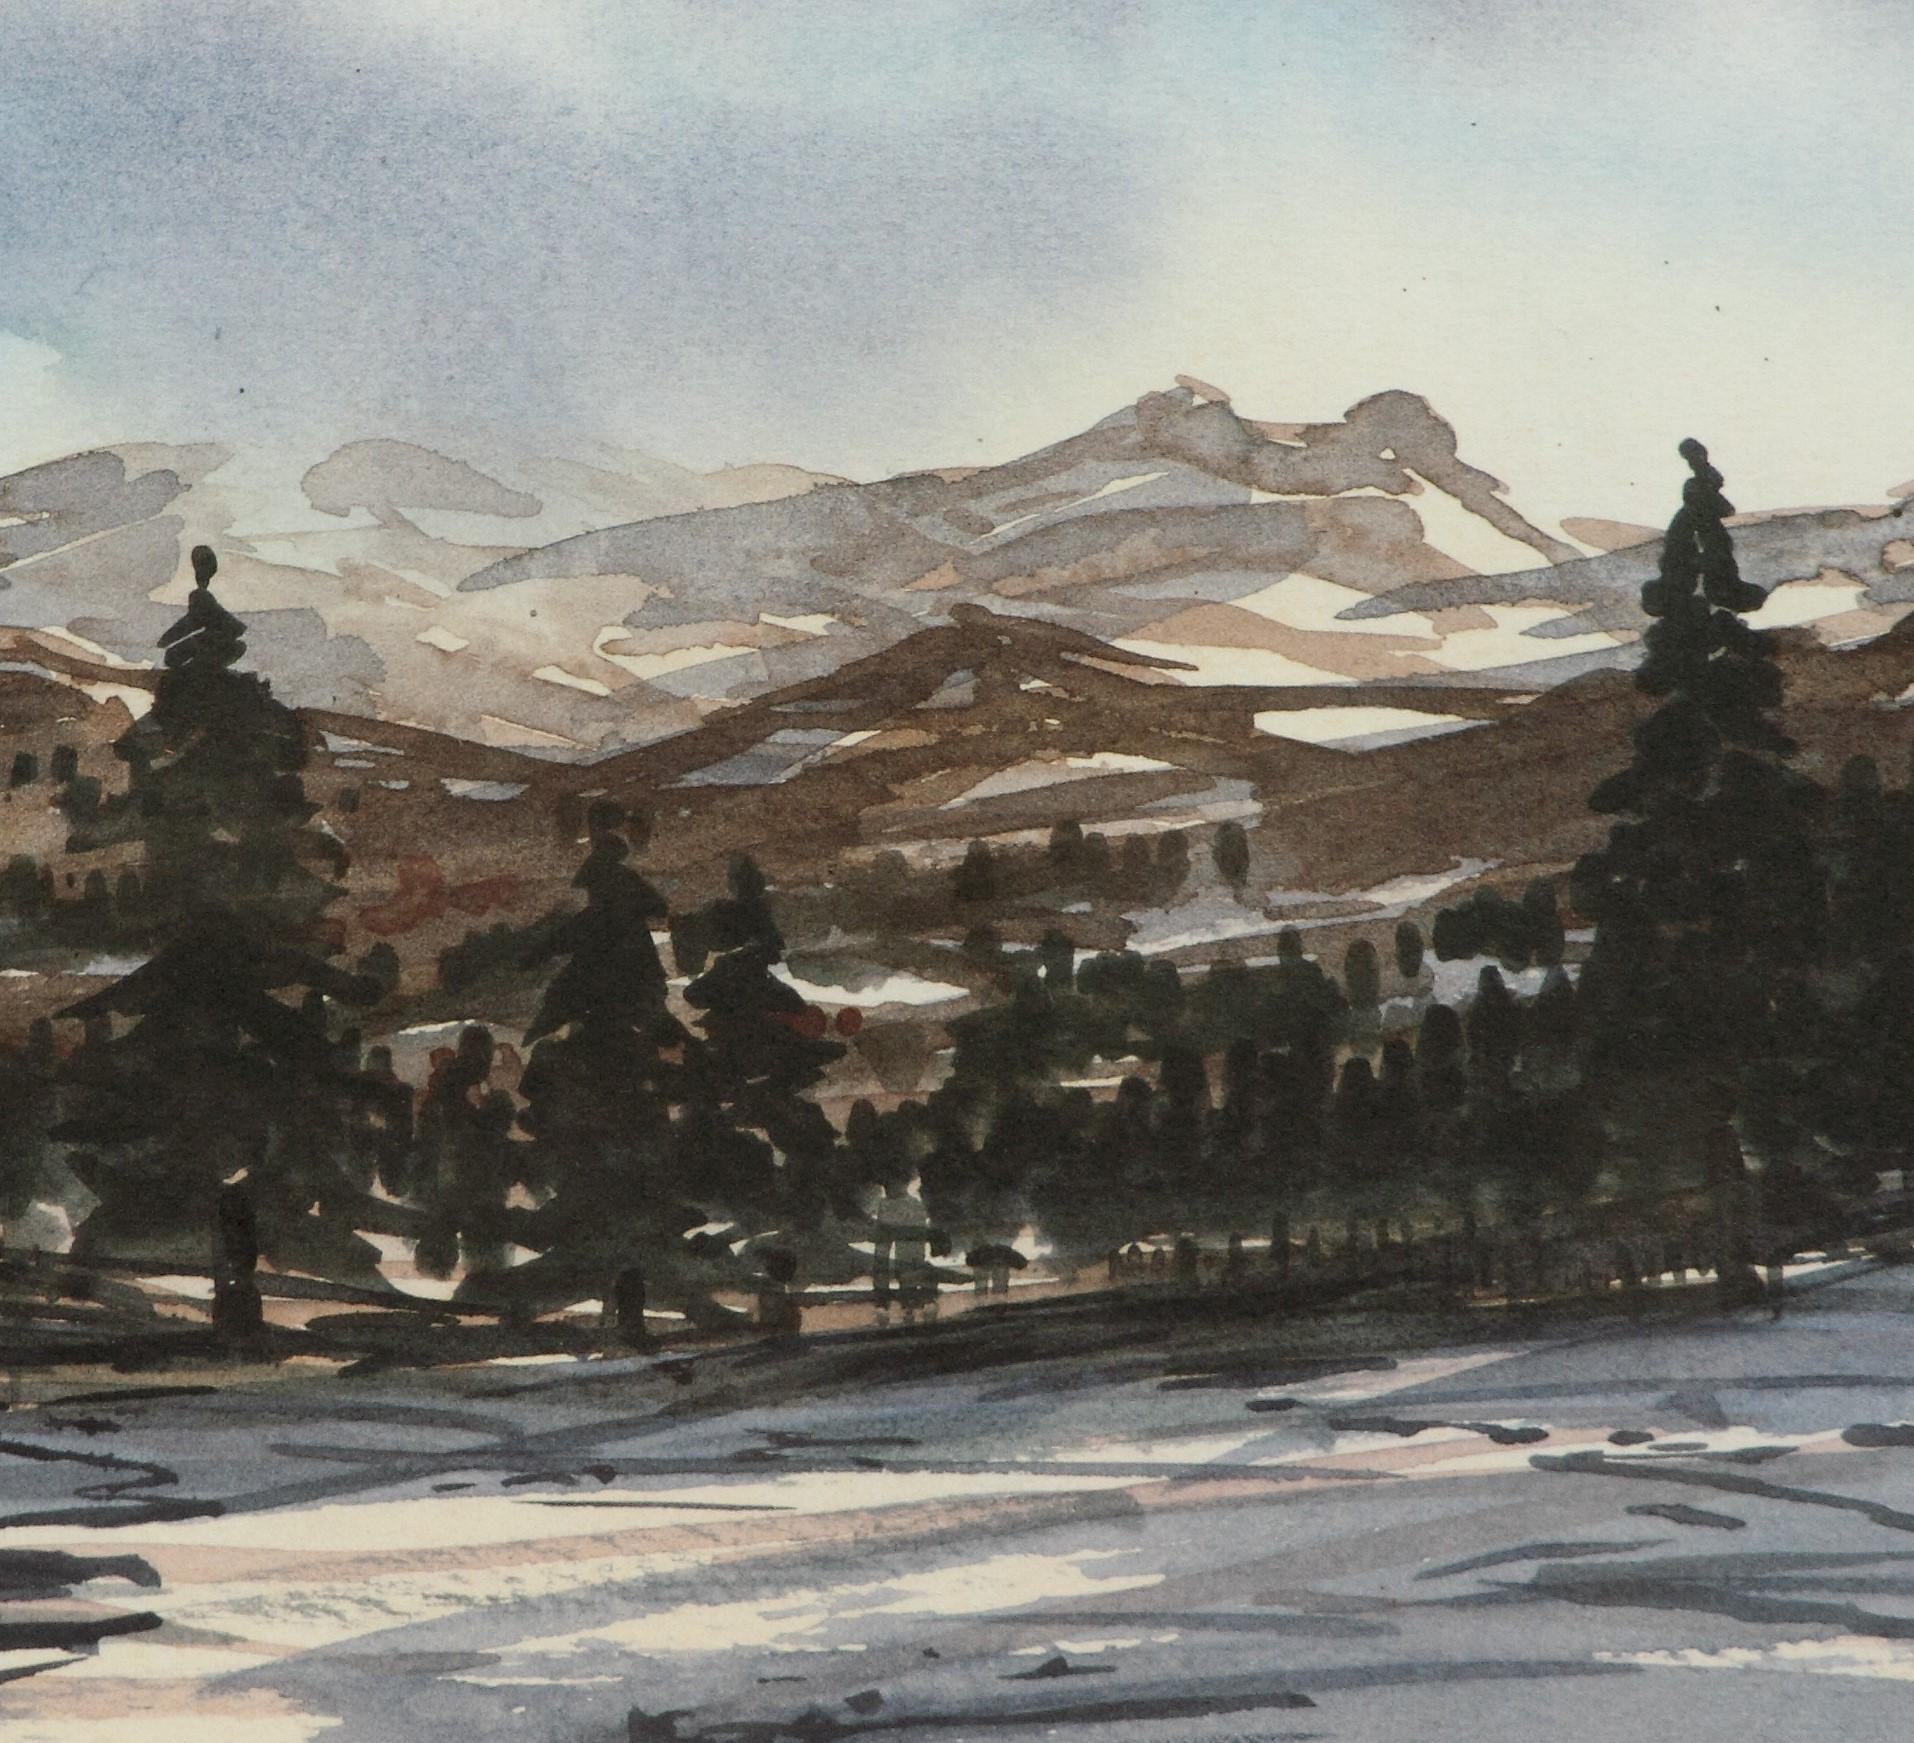 Balmoral Winter Scene - Signed Lithograph, Royal Art, Scotland, Season, Landscape - Print by His Majesty King Charles III